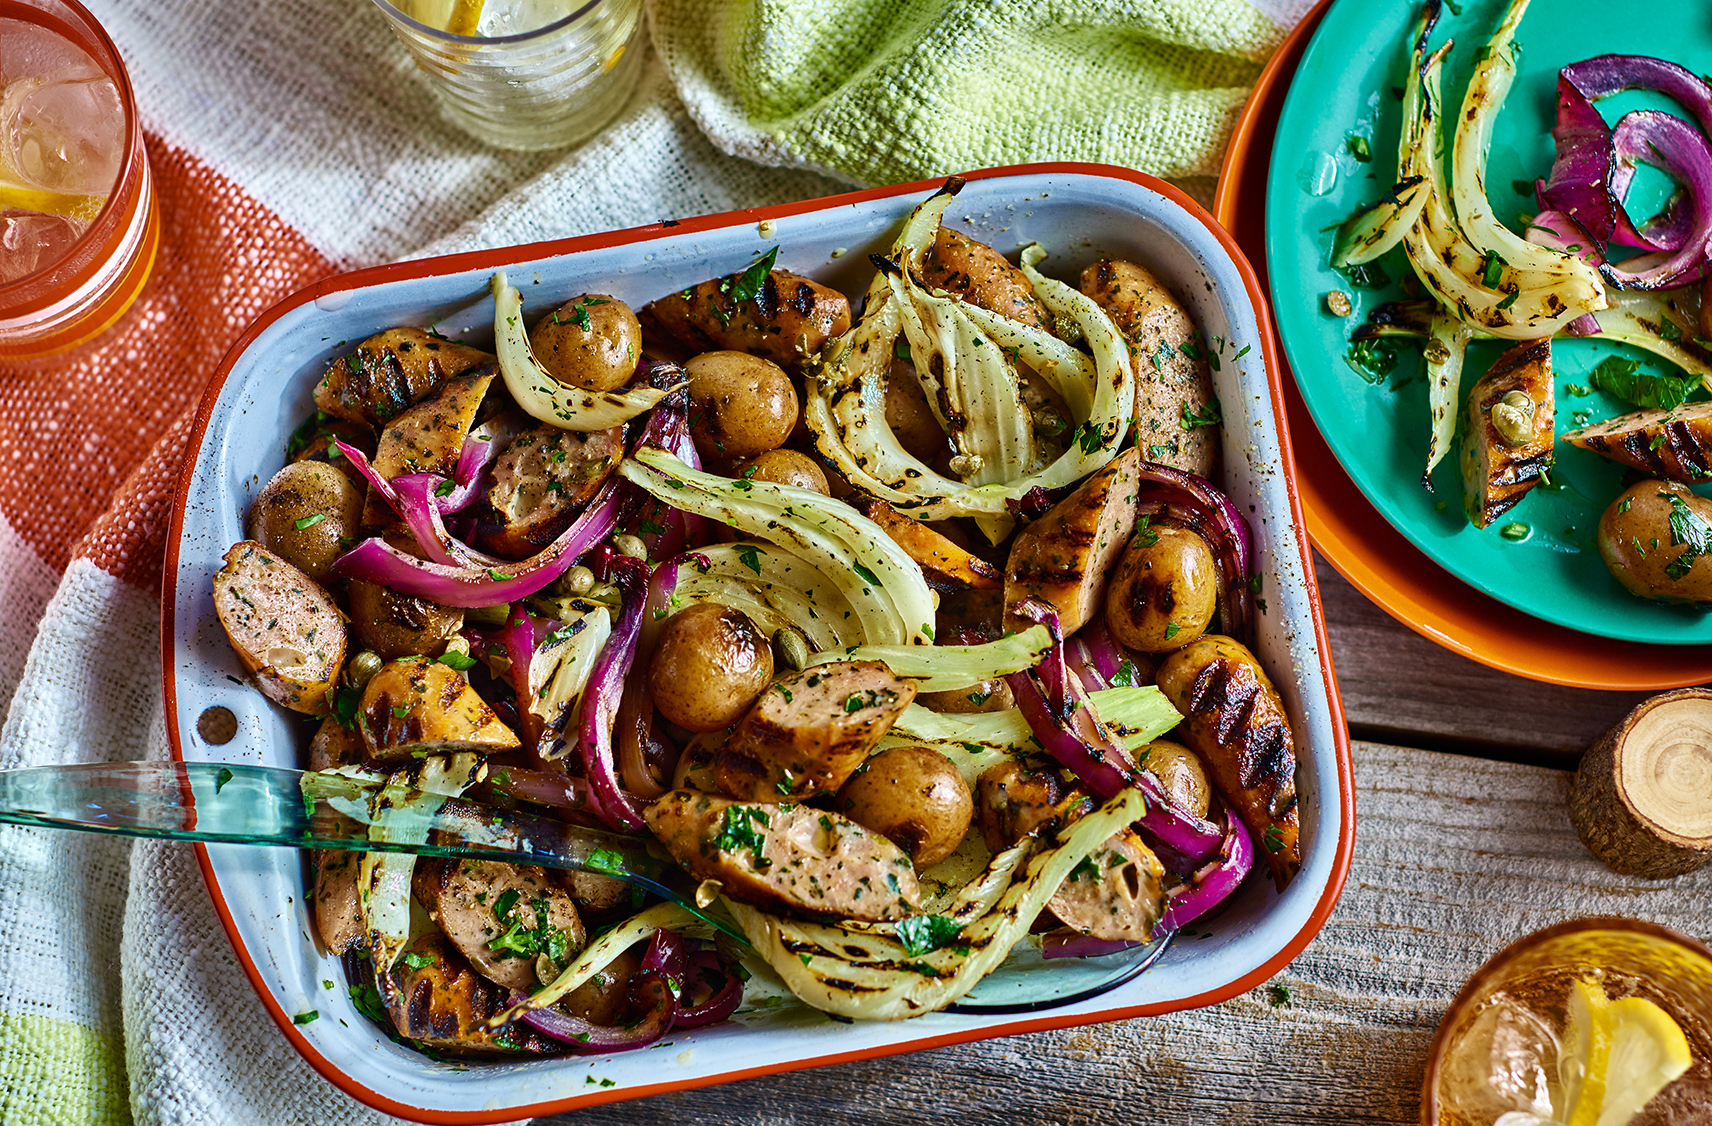 A platter of grilled sausage and potato salad with fennel and onions
